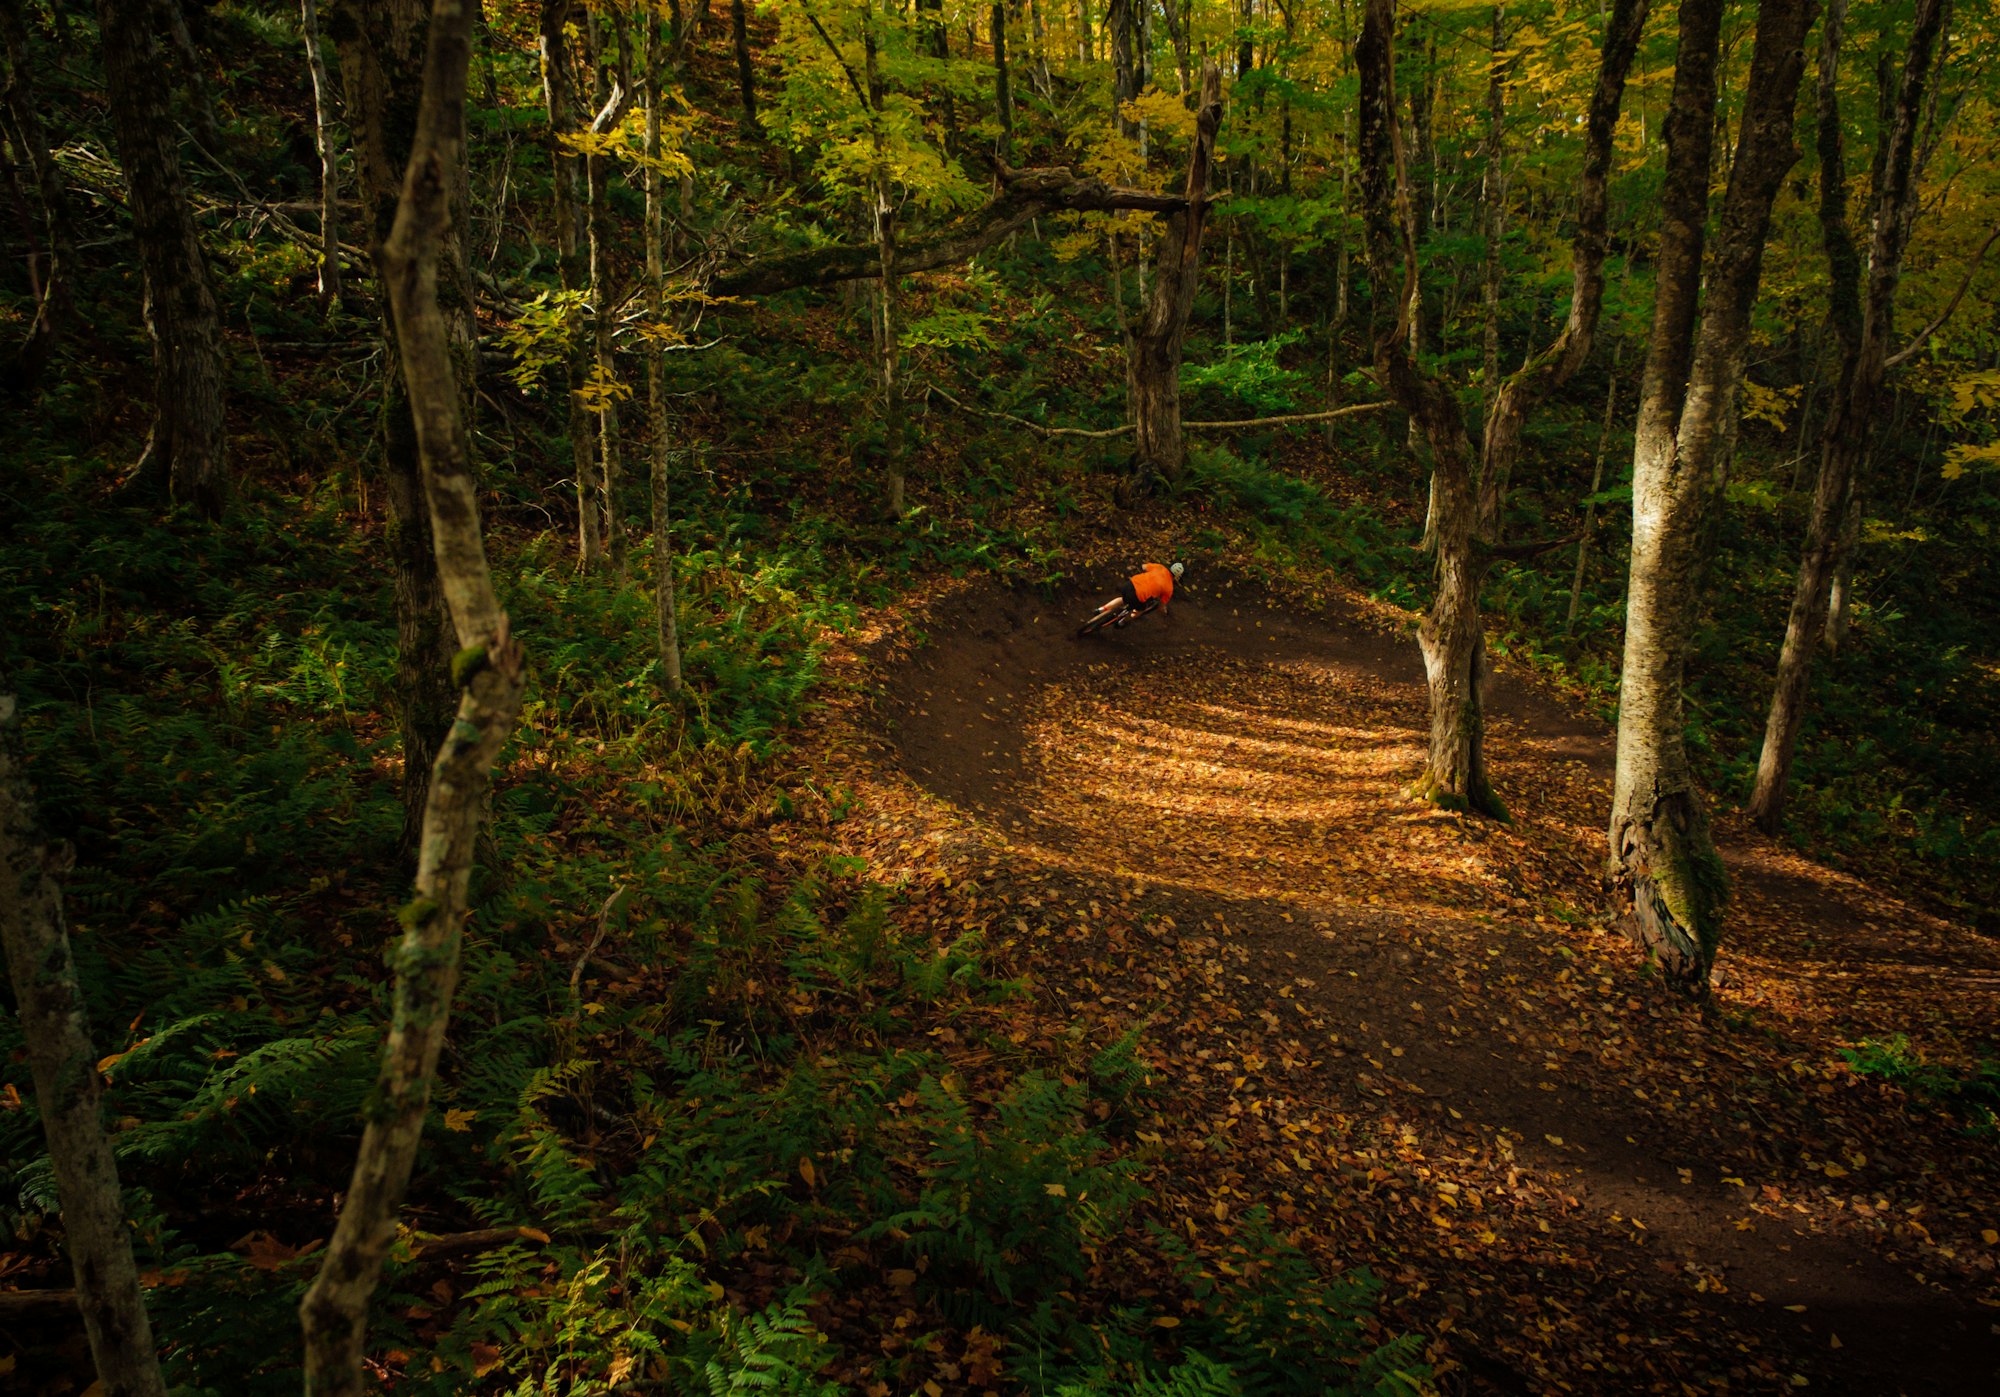 Rider ripping through the bowl on Riverside during the Keppoch Enduro Challenge